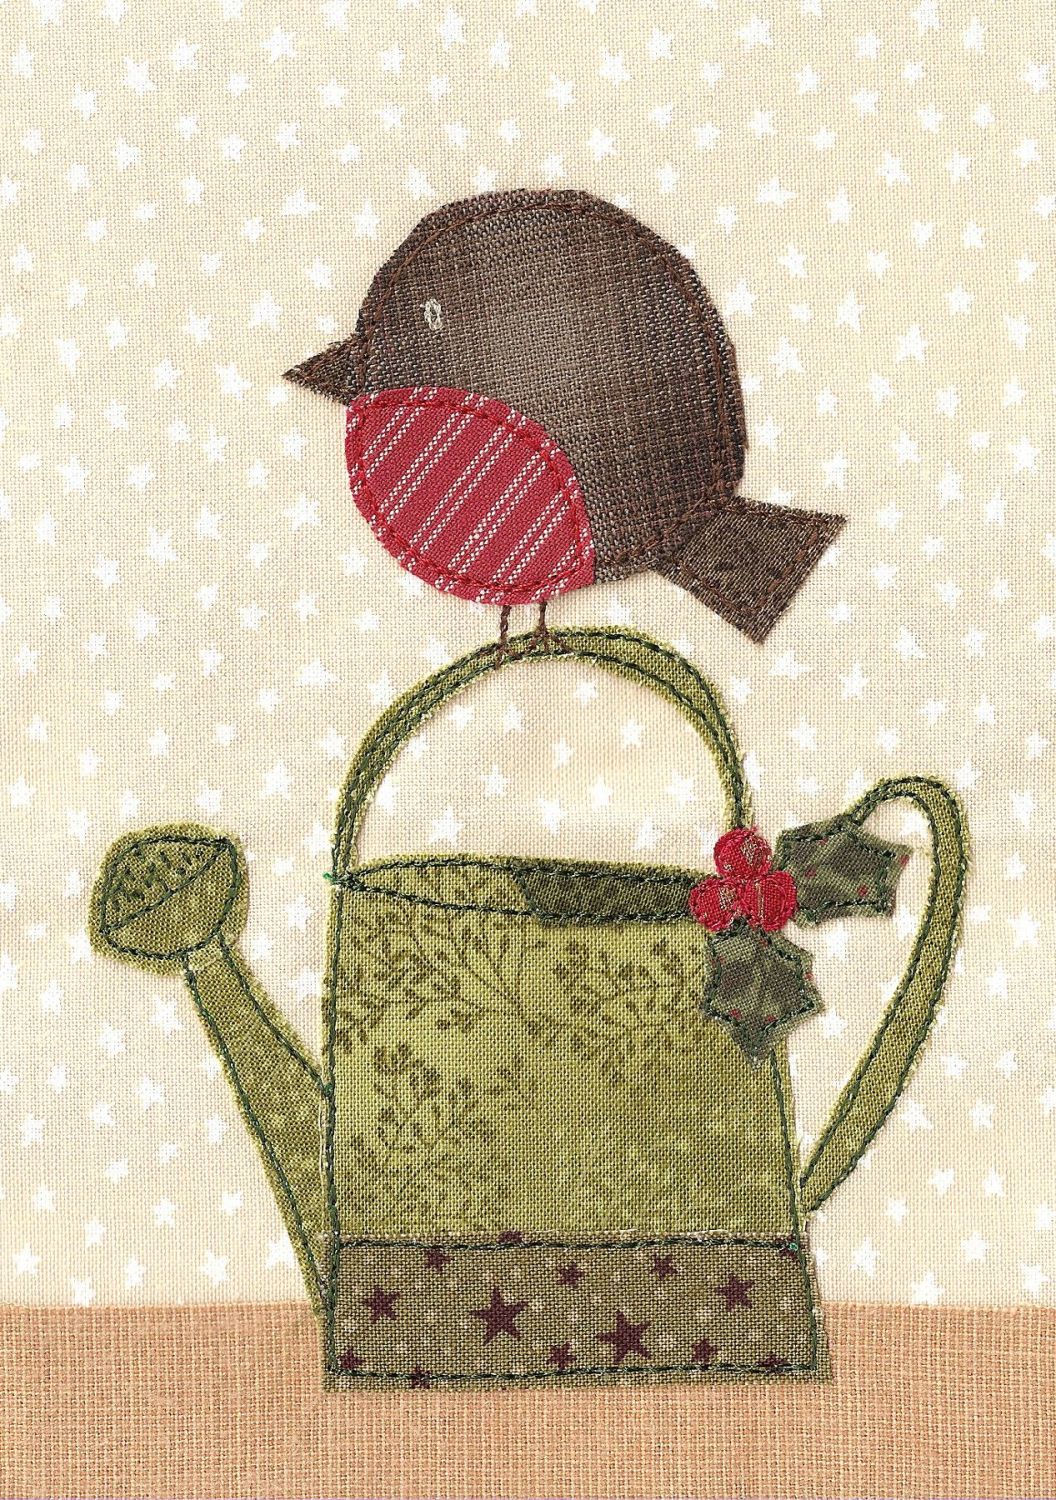 Christmas textile and fabric appliqué patterns and designs by cat rowe